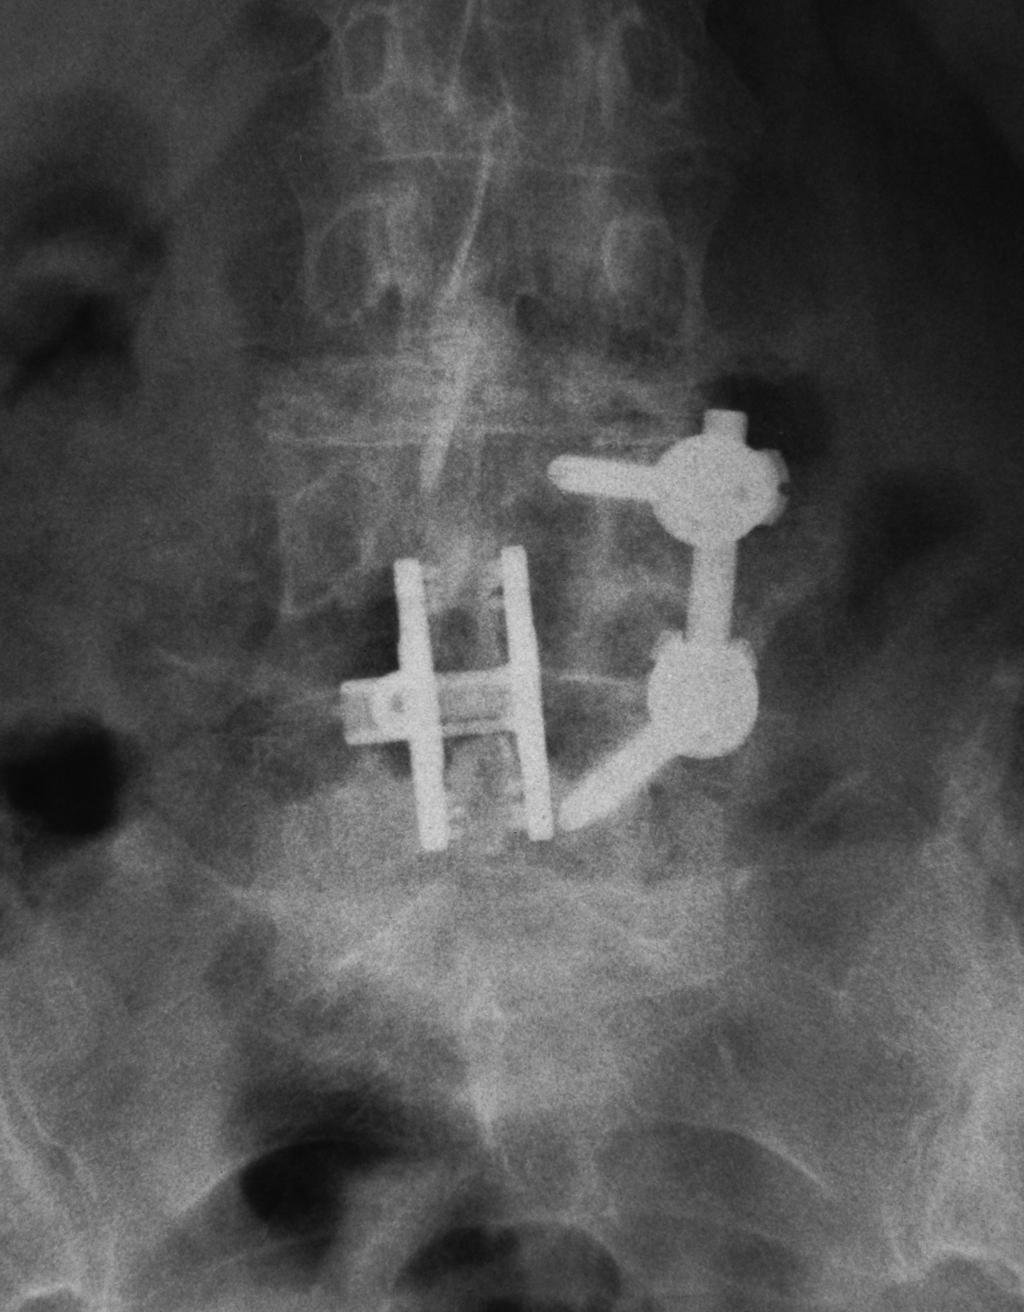 fusion unilateral left (unstable screws on right side)